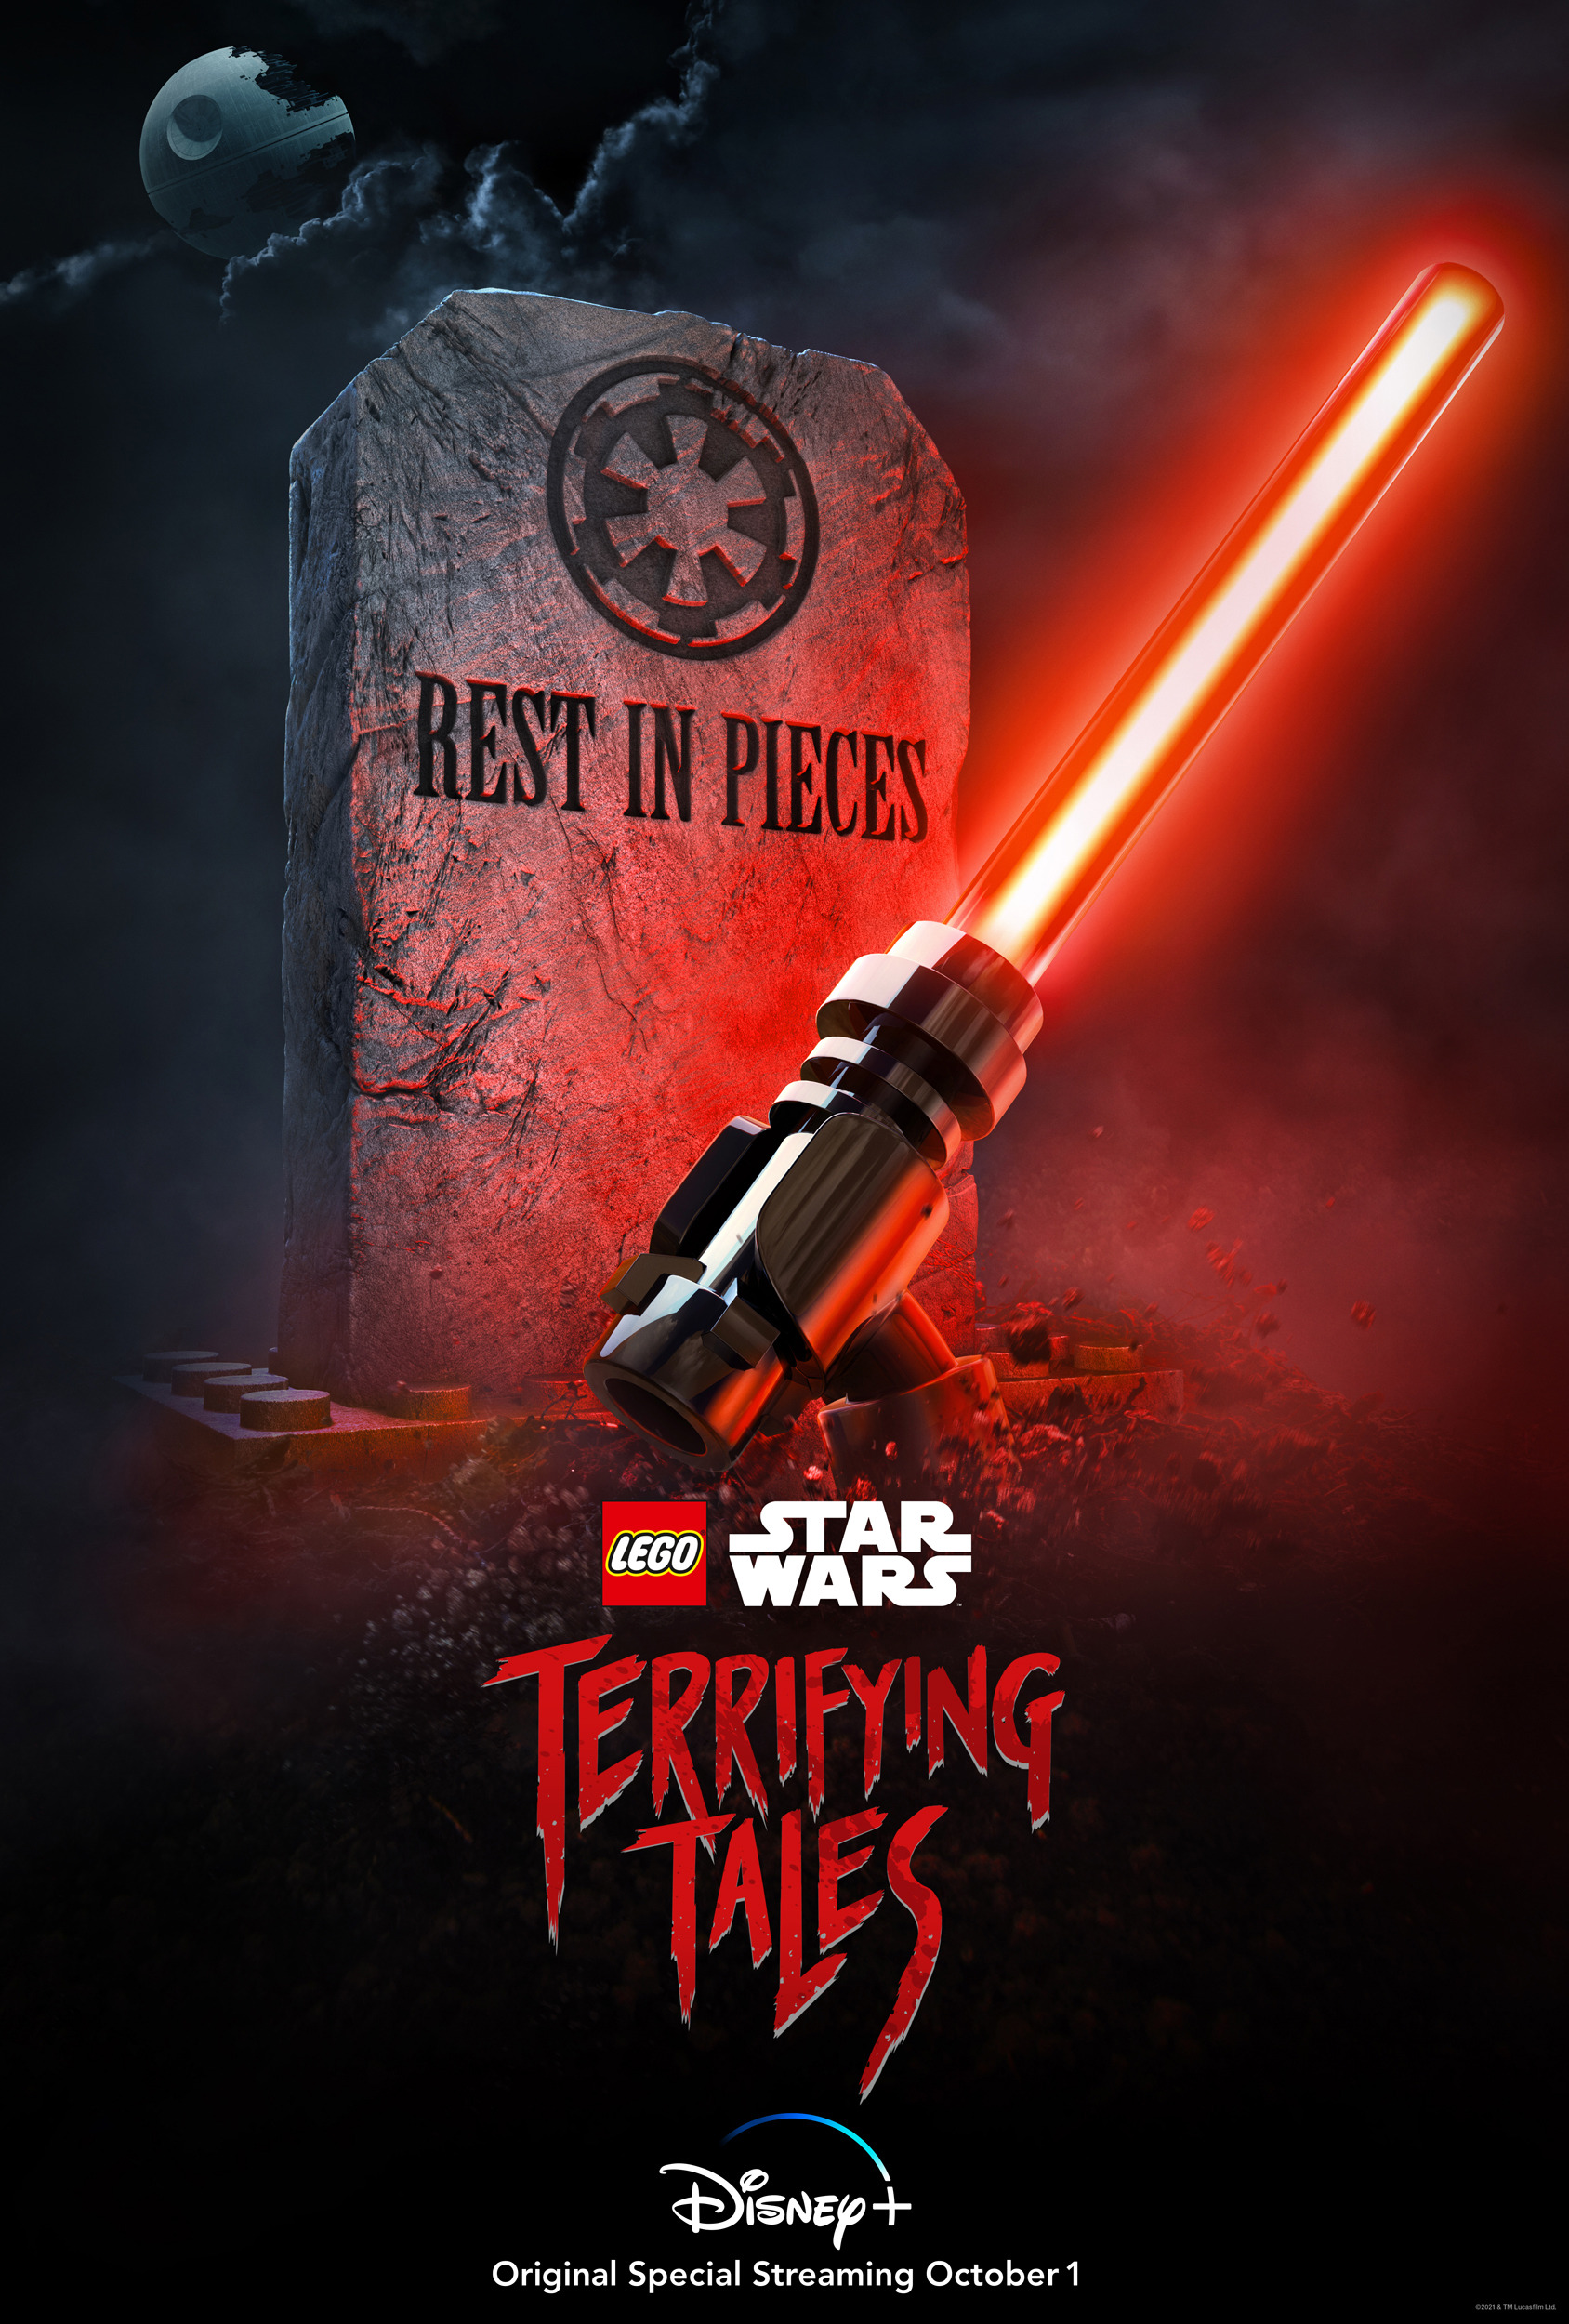 Mega Sized TV Poster Image for Lego Star Wars Terrifying Tales (#1 of 5)